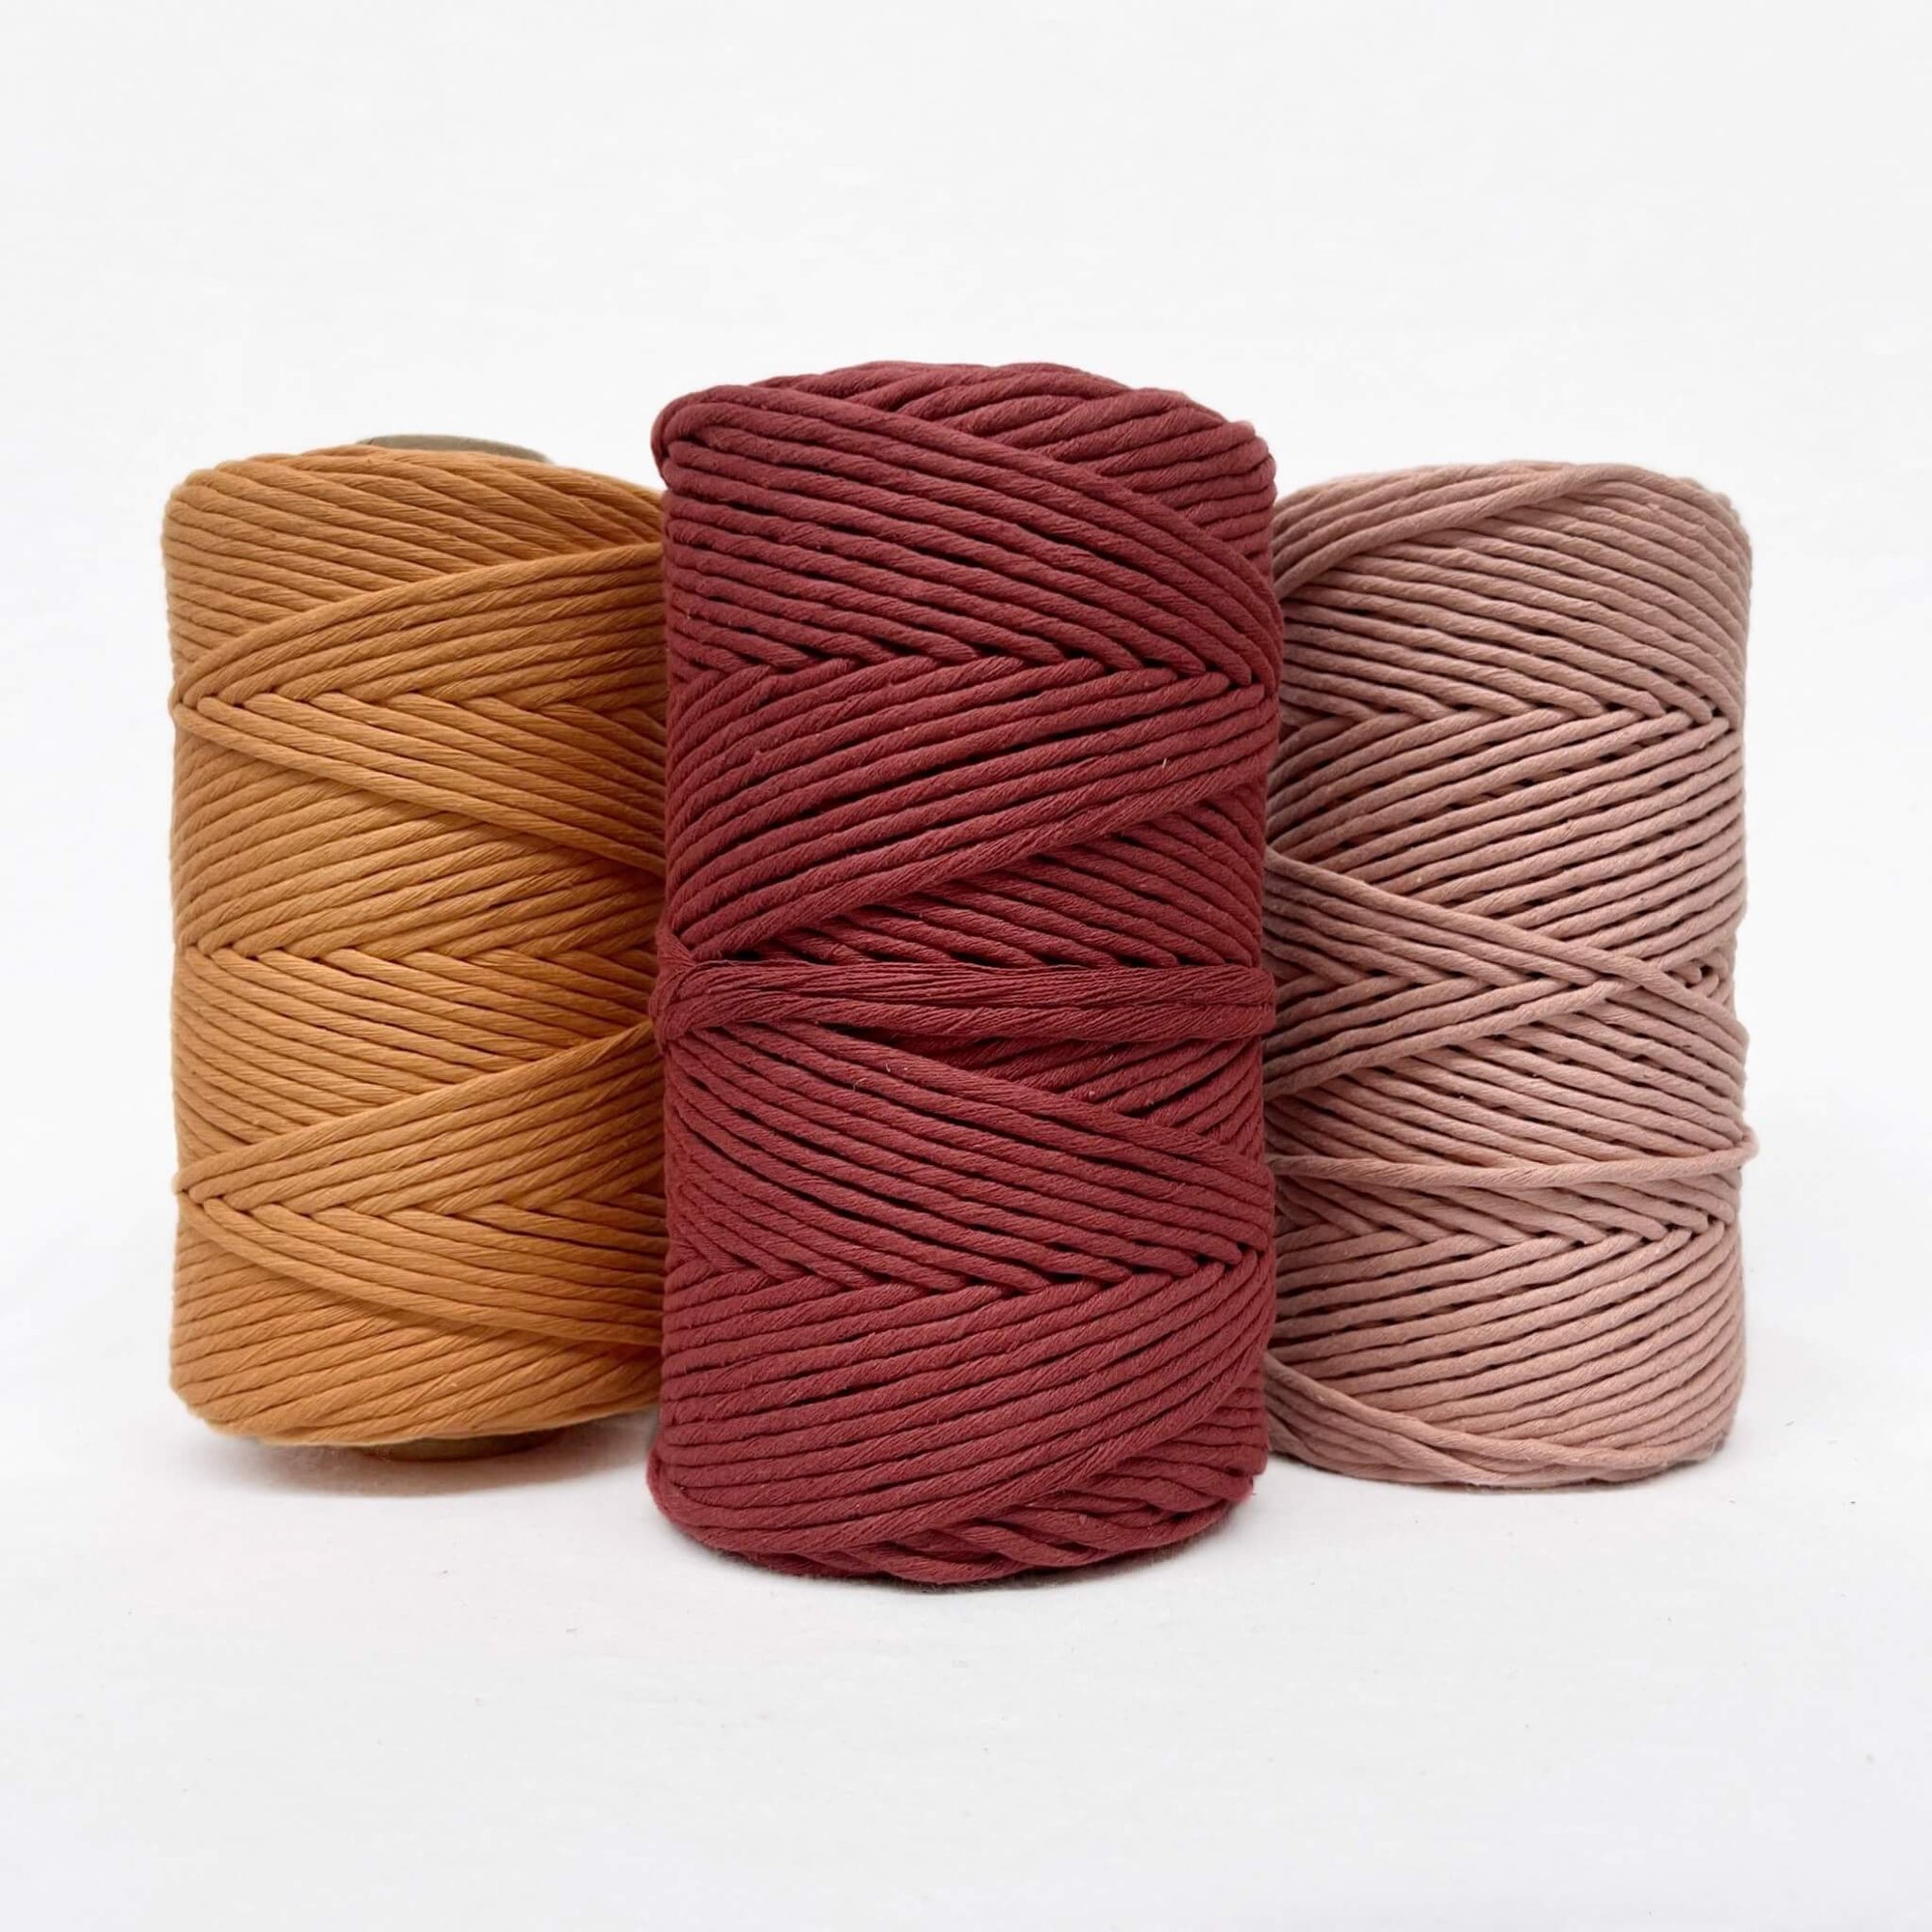 mary maker studio 1kg 5mm recycled cotton macrame string in neutral vintage peach colour suitable for macrame workshops beginners and advanced artists